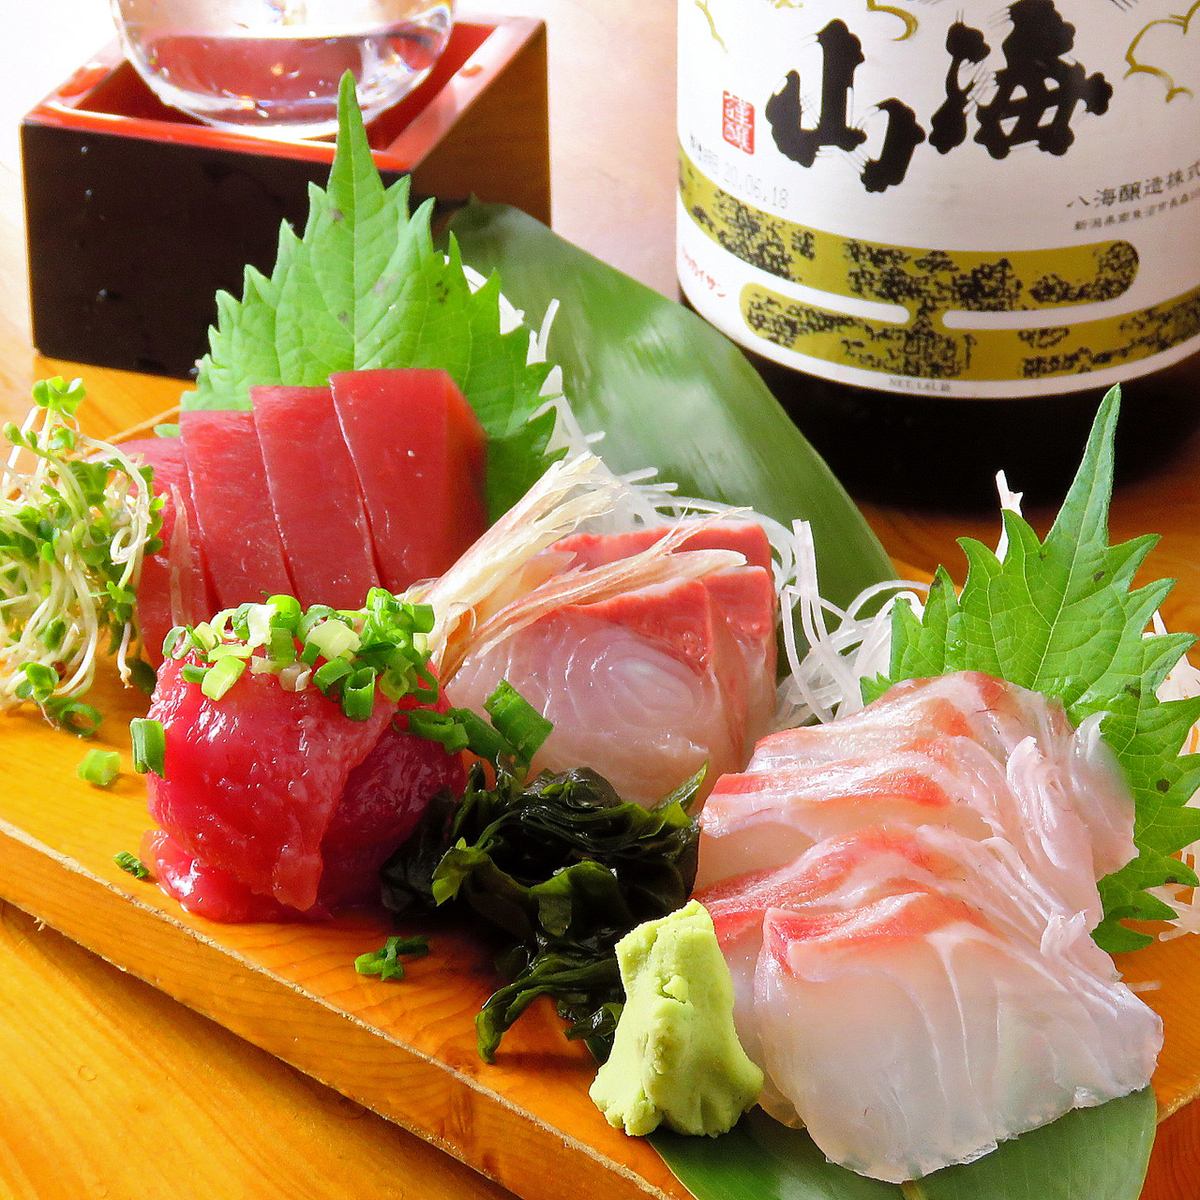 Serving fresh fish procured every day as a platter of sashimi